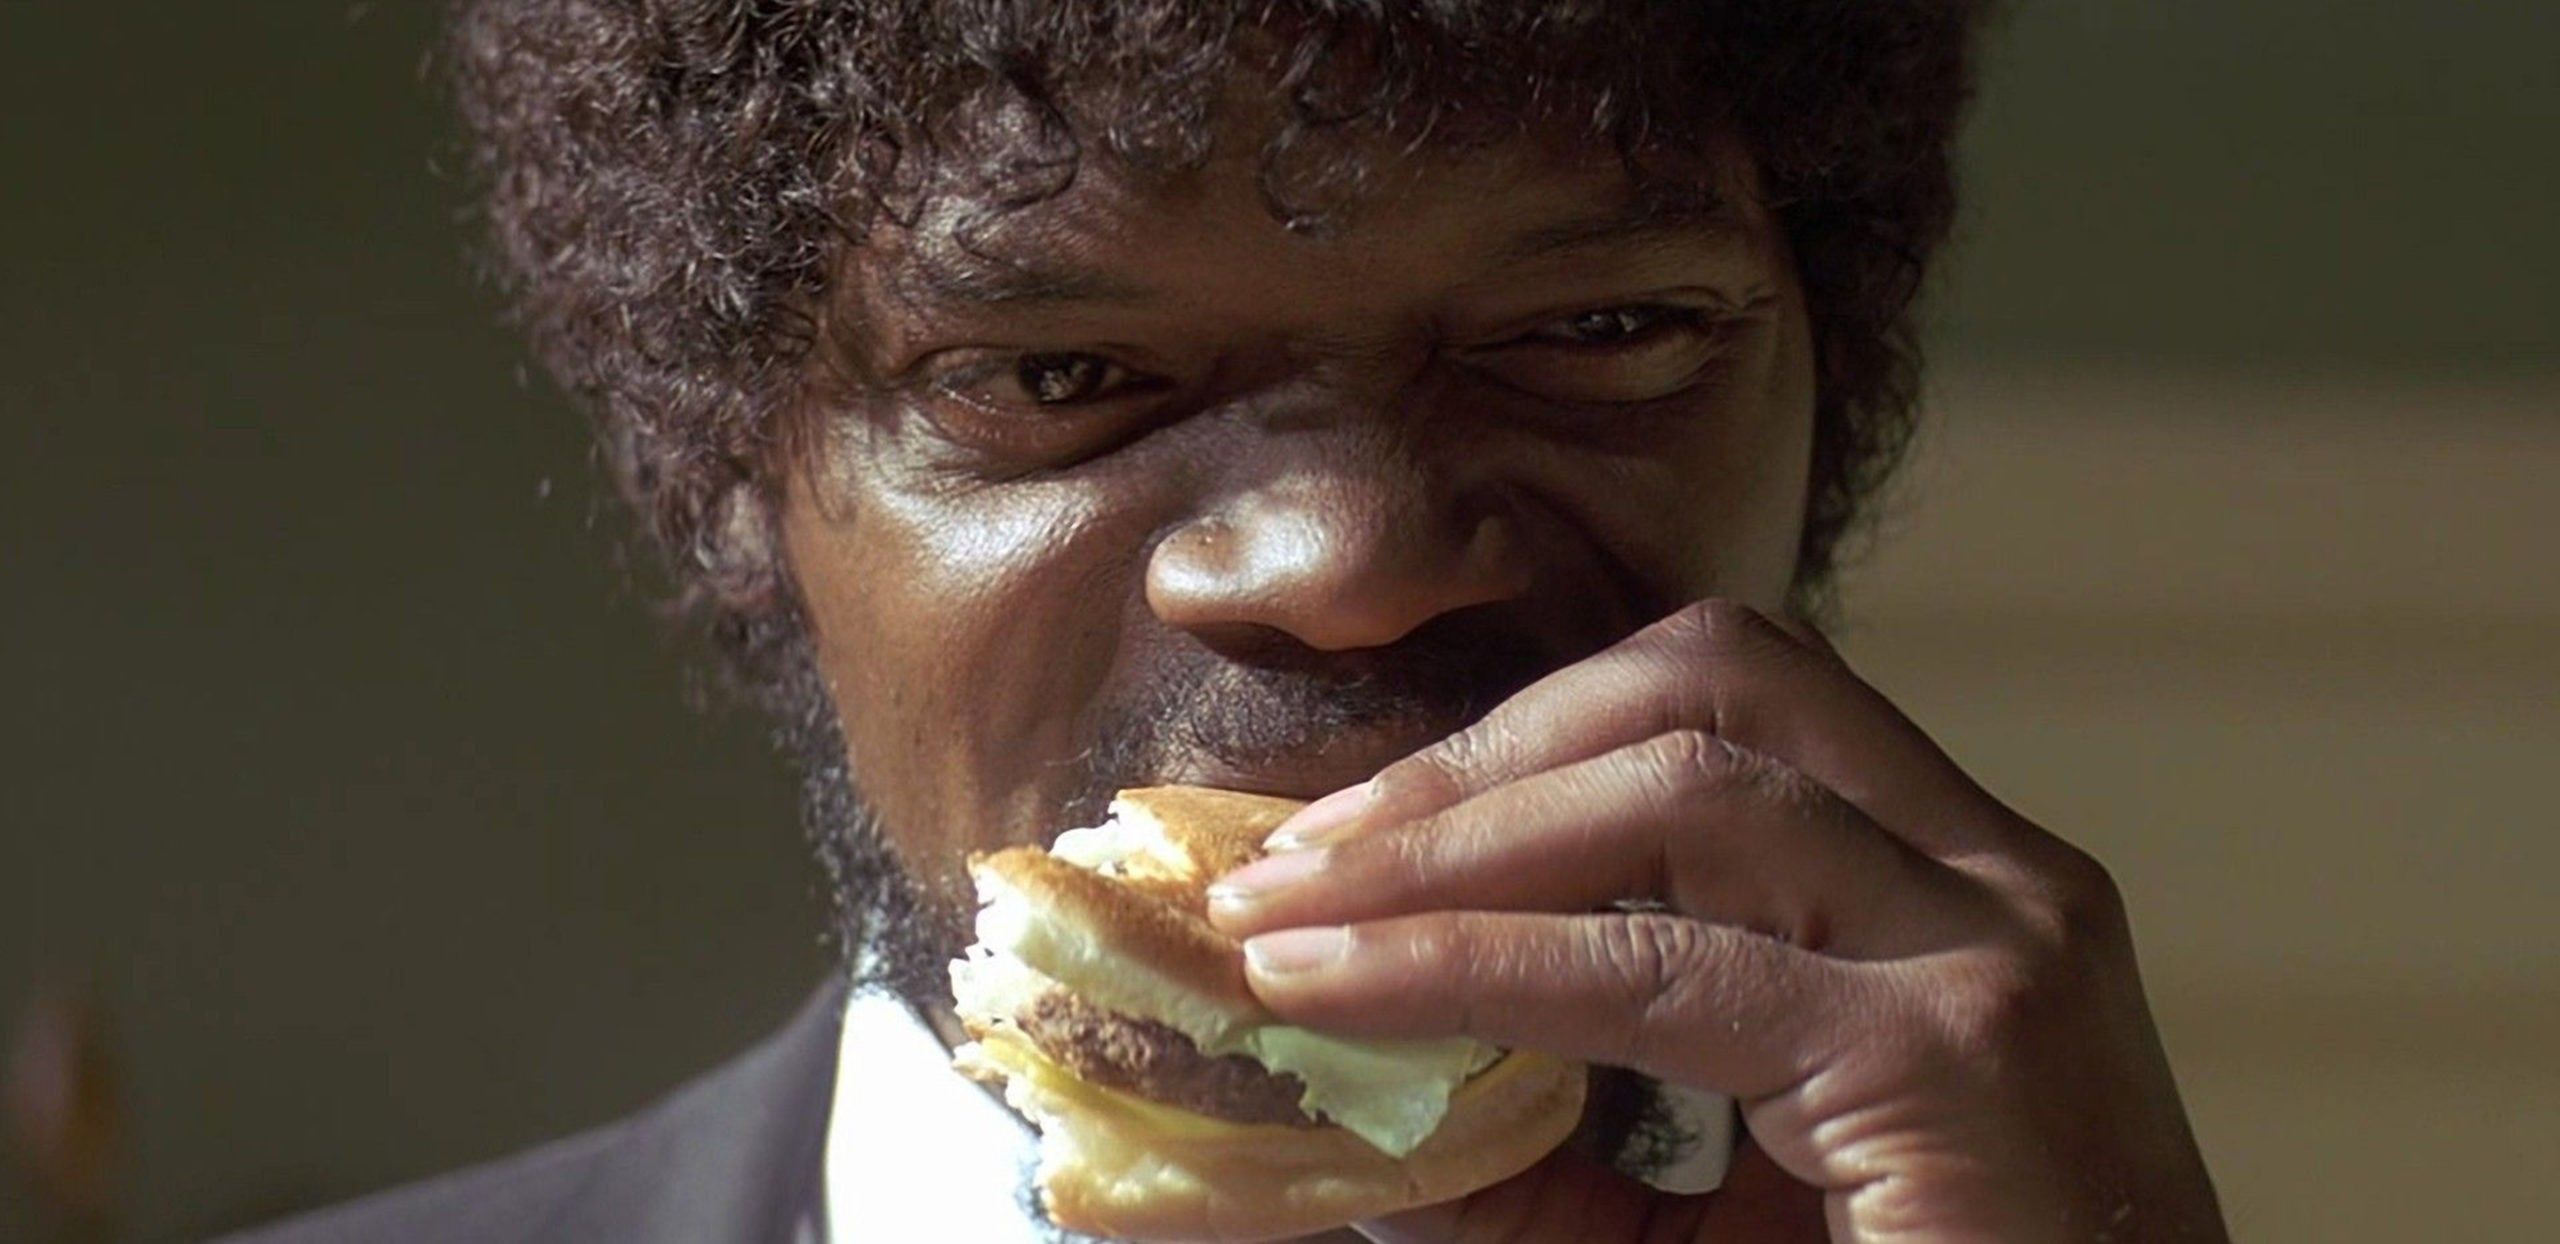 How Tarantino Uses Dialogue in the Burger Scene to Intimidate